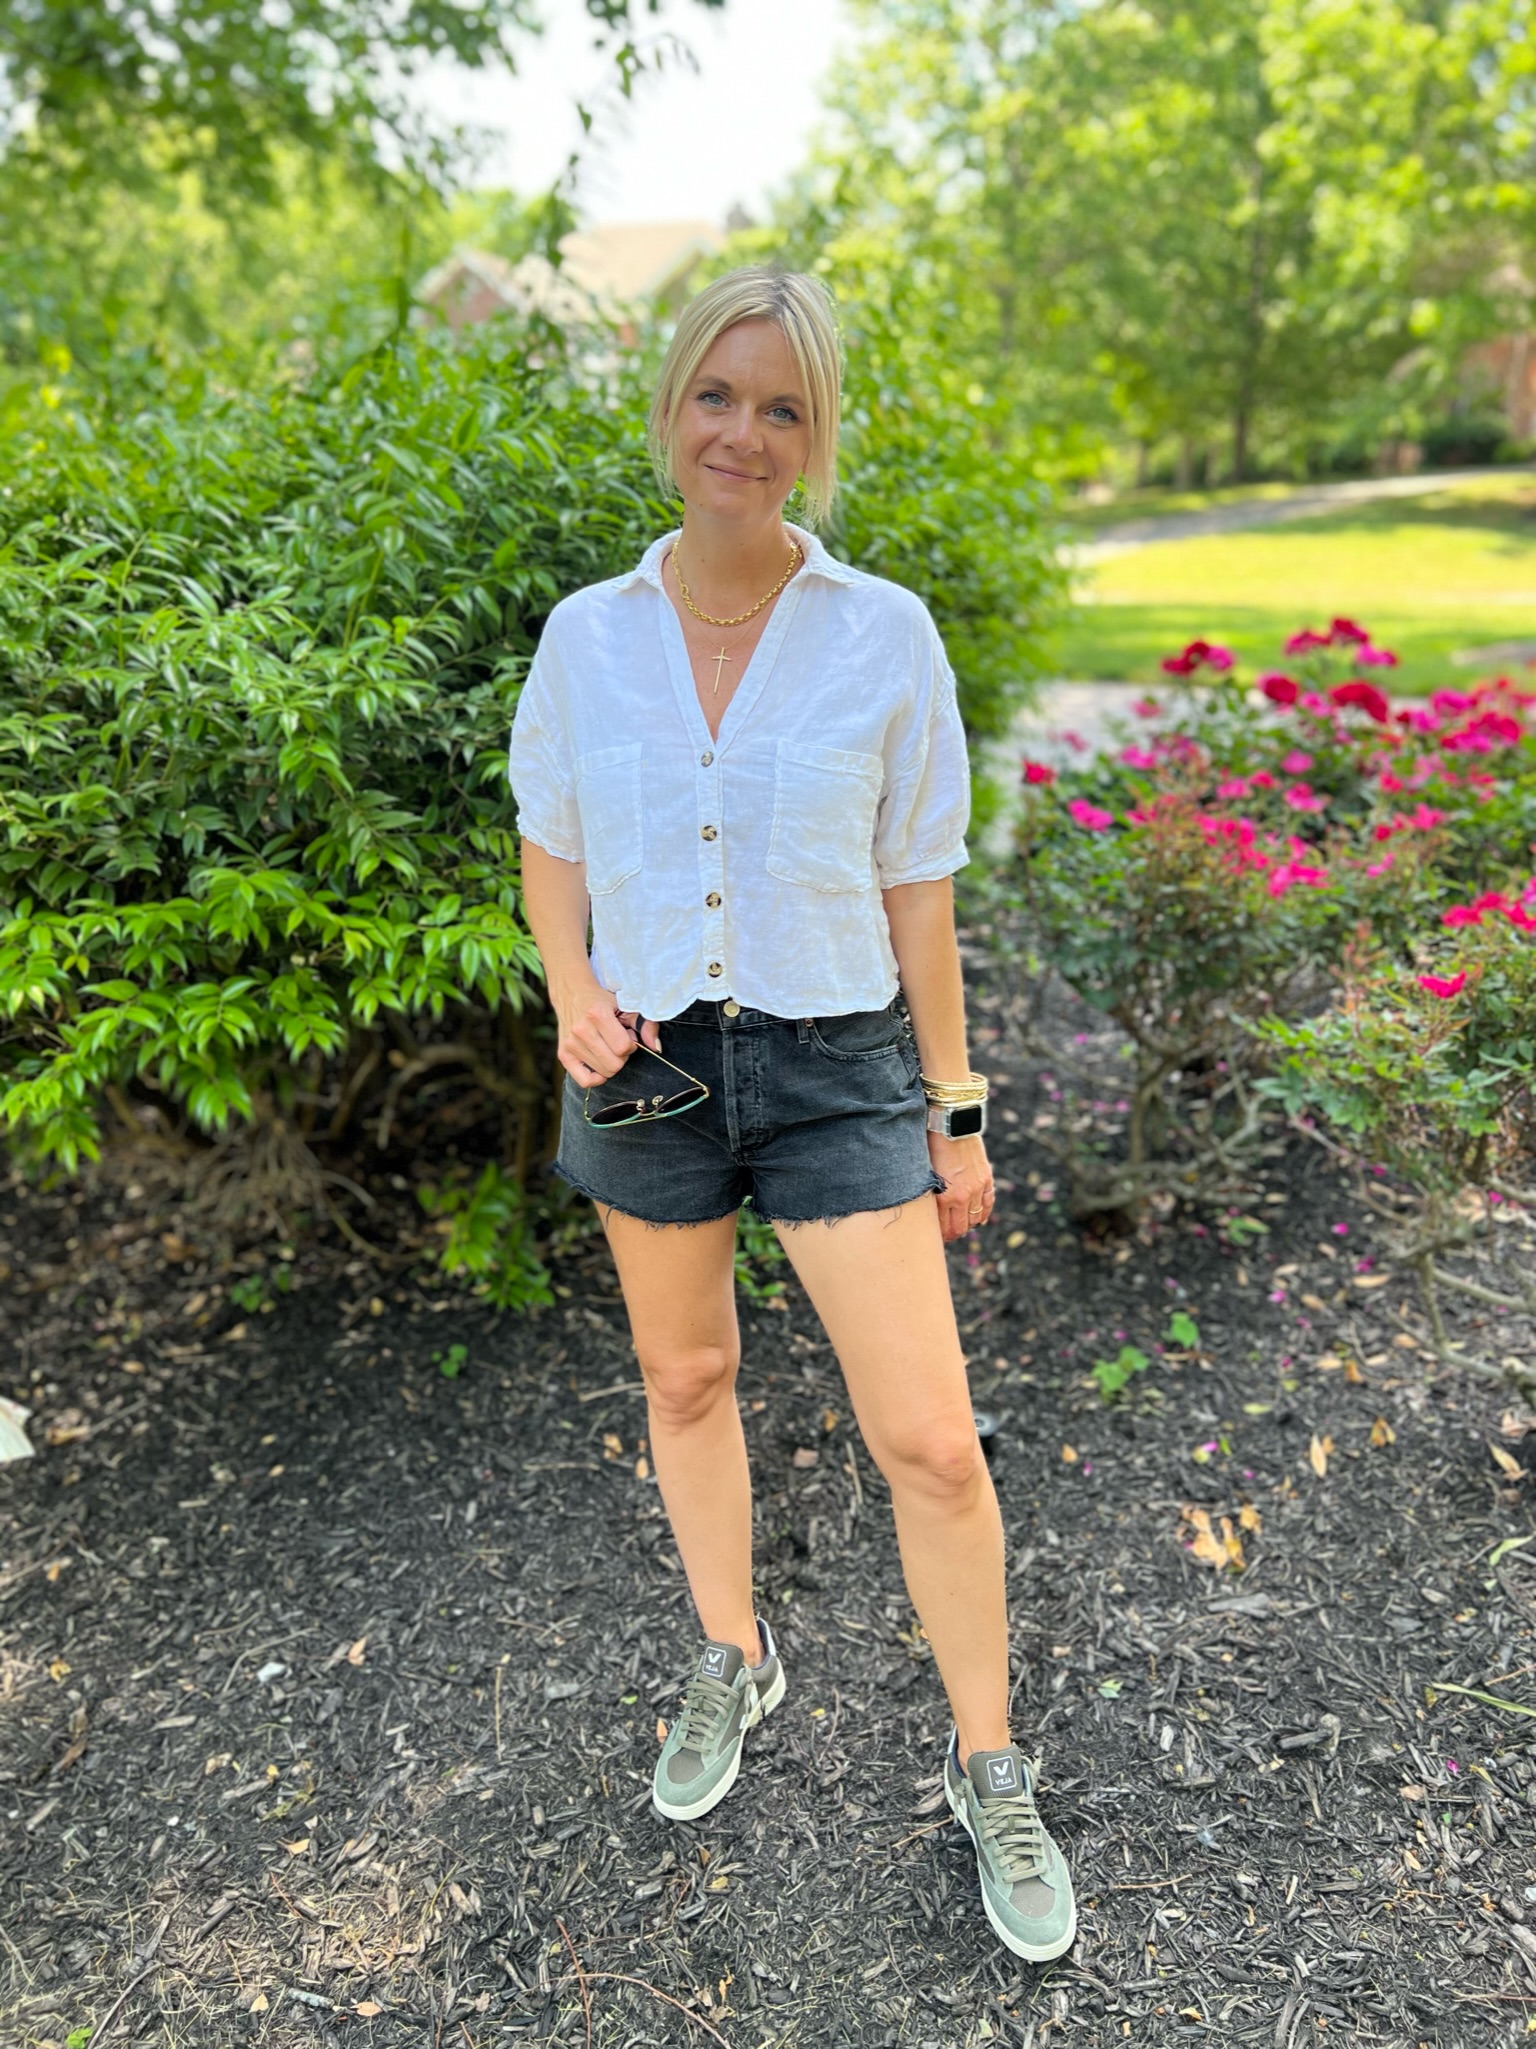 How To Wear Sneakers For Summer black cutoff shorts how to style cutoffs for summer how to wear sneakers with a button-up shirt summer style inspiration